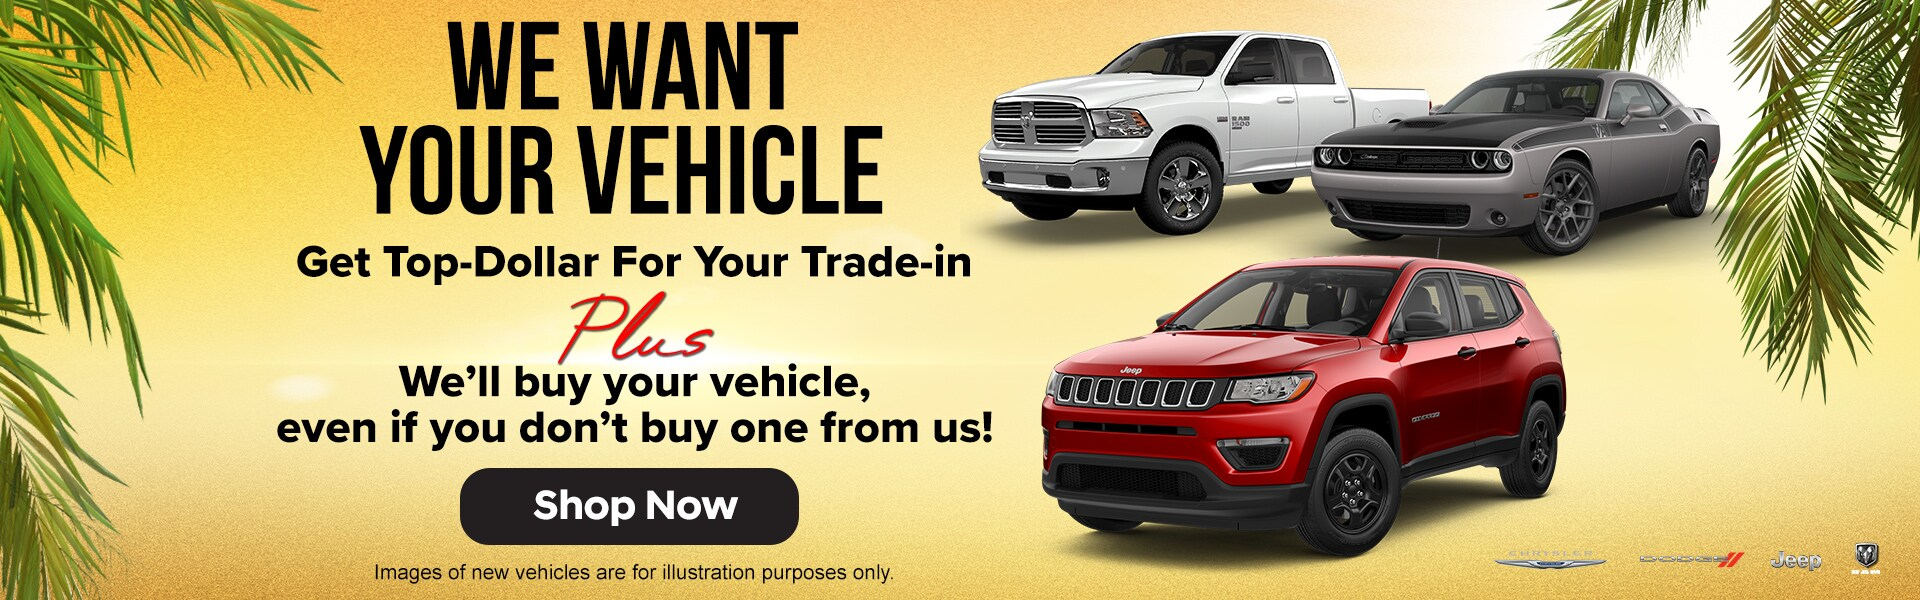  We Want Your Vehicle 